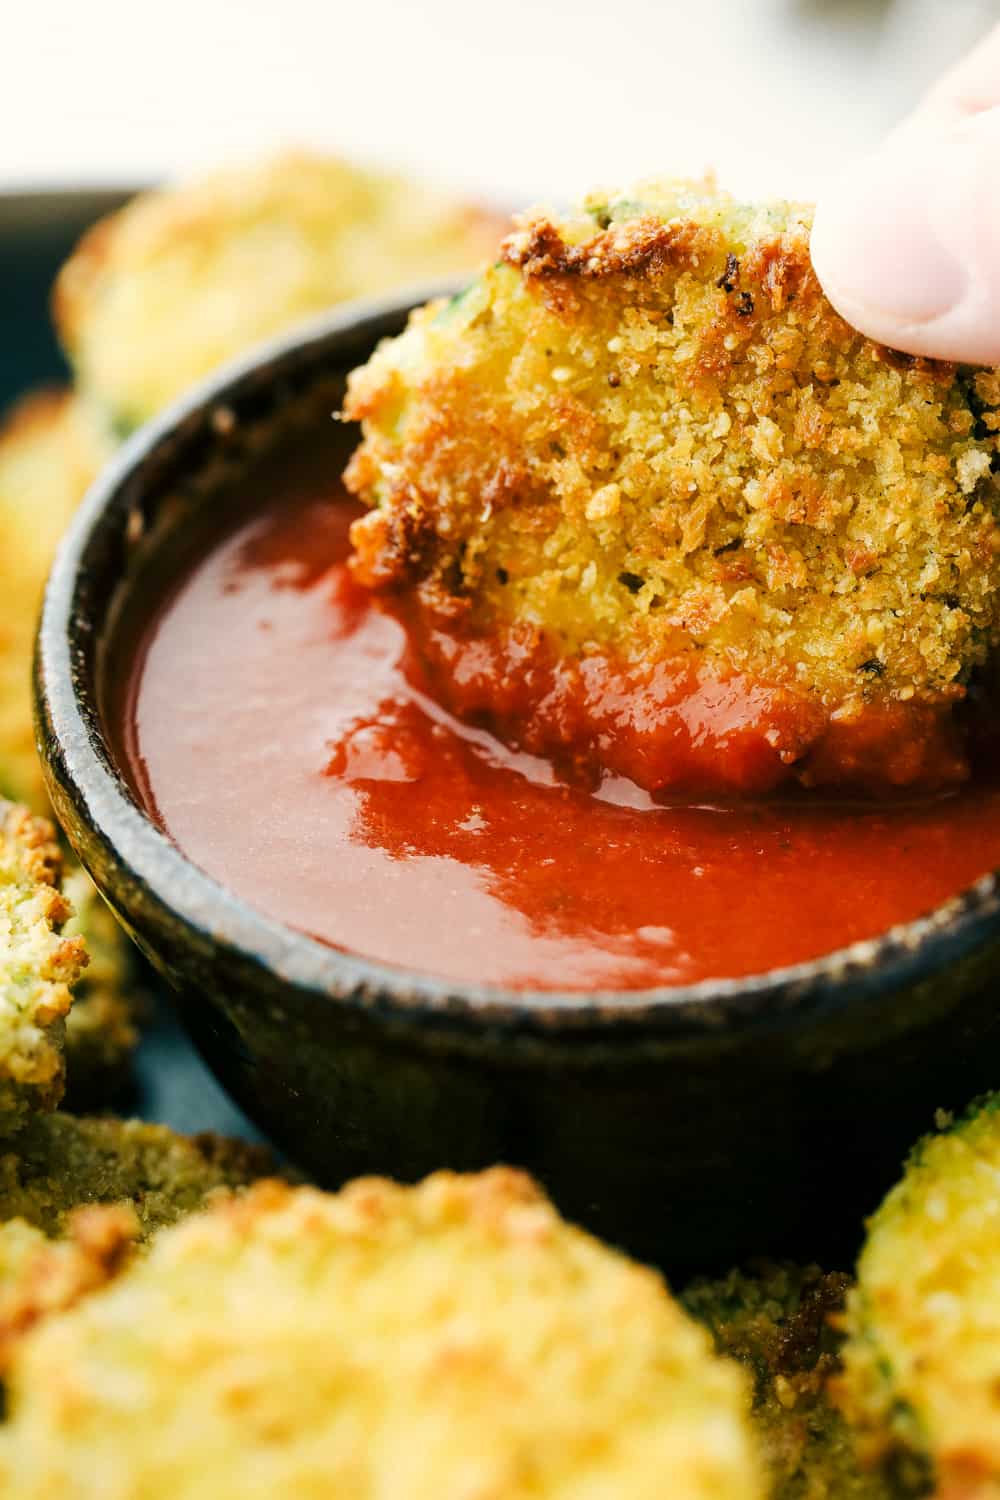 Dipping an air fried zucchini chip in ketchup. 